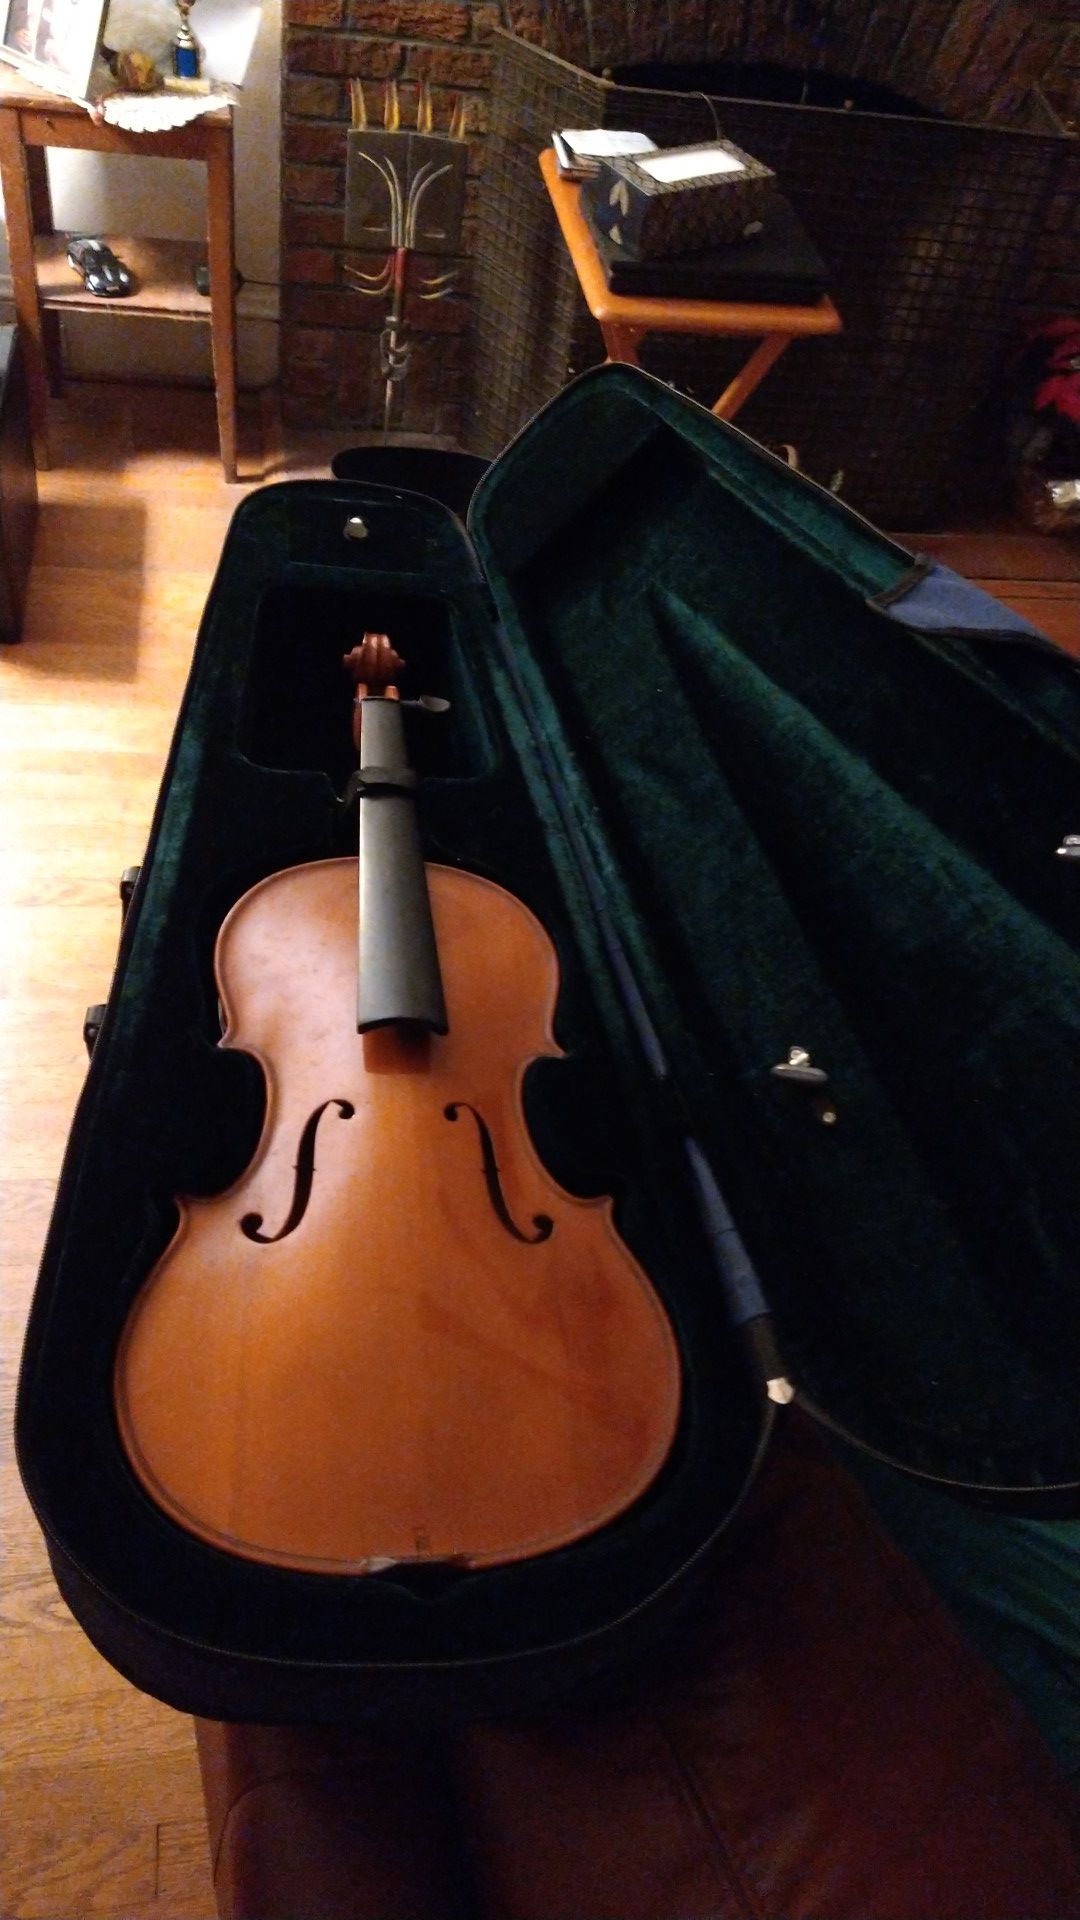 Violin unstrung with case